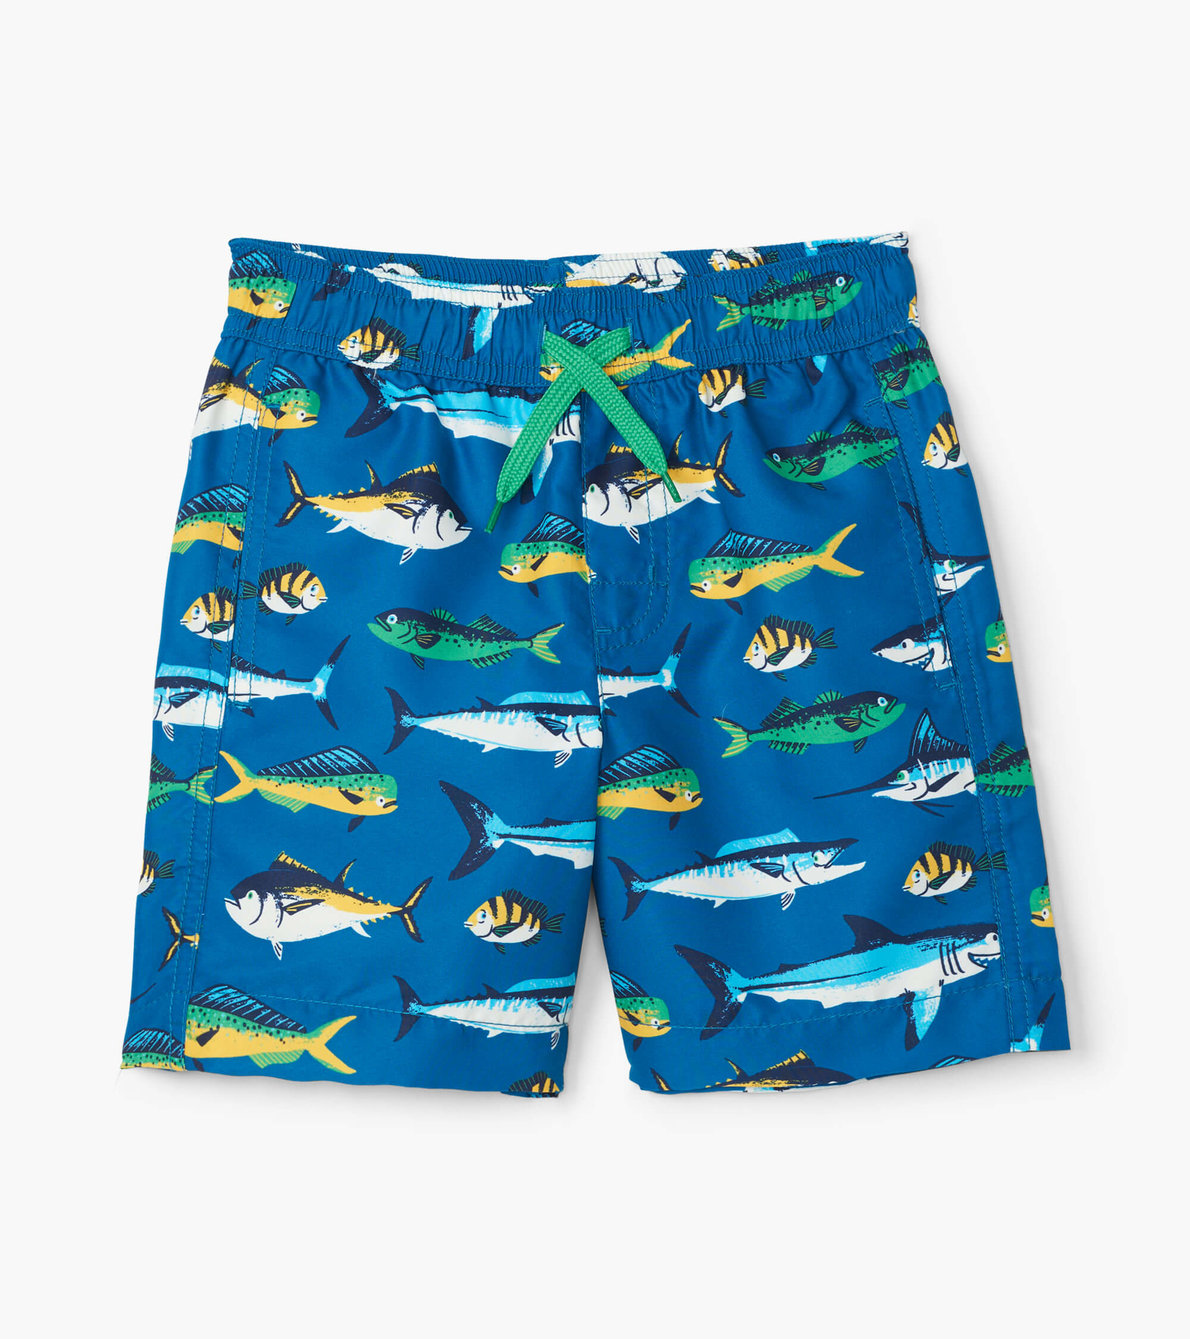 View larger image of Game Fish Swim Trunks